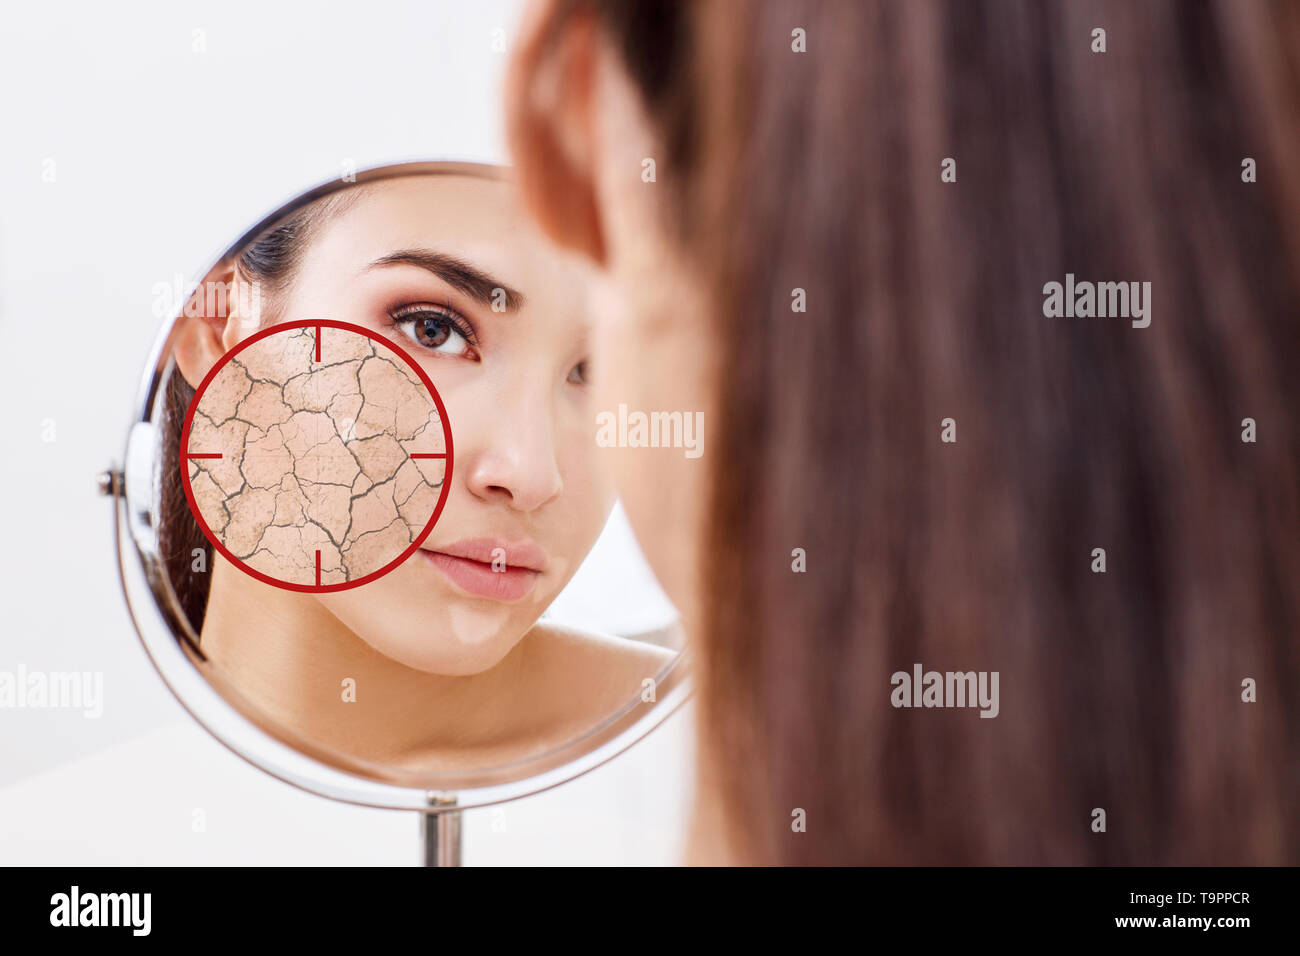 Red aim shows dry facial skin before moistening. Stock Photo